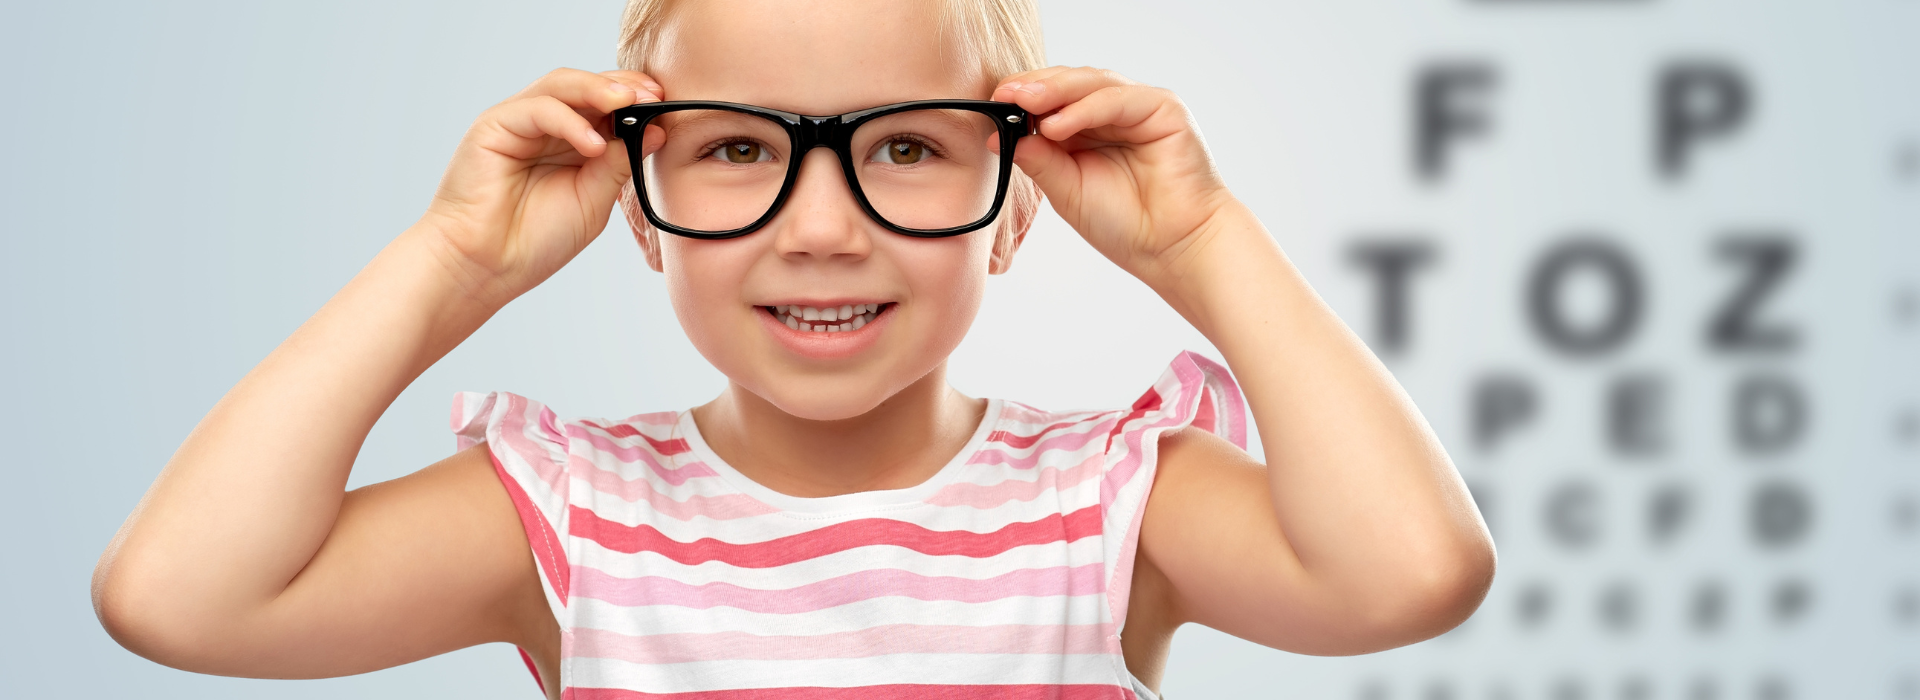 8 Clear Signs Your Toddler May Need Glasses